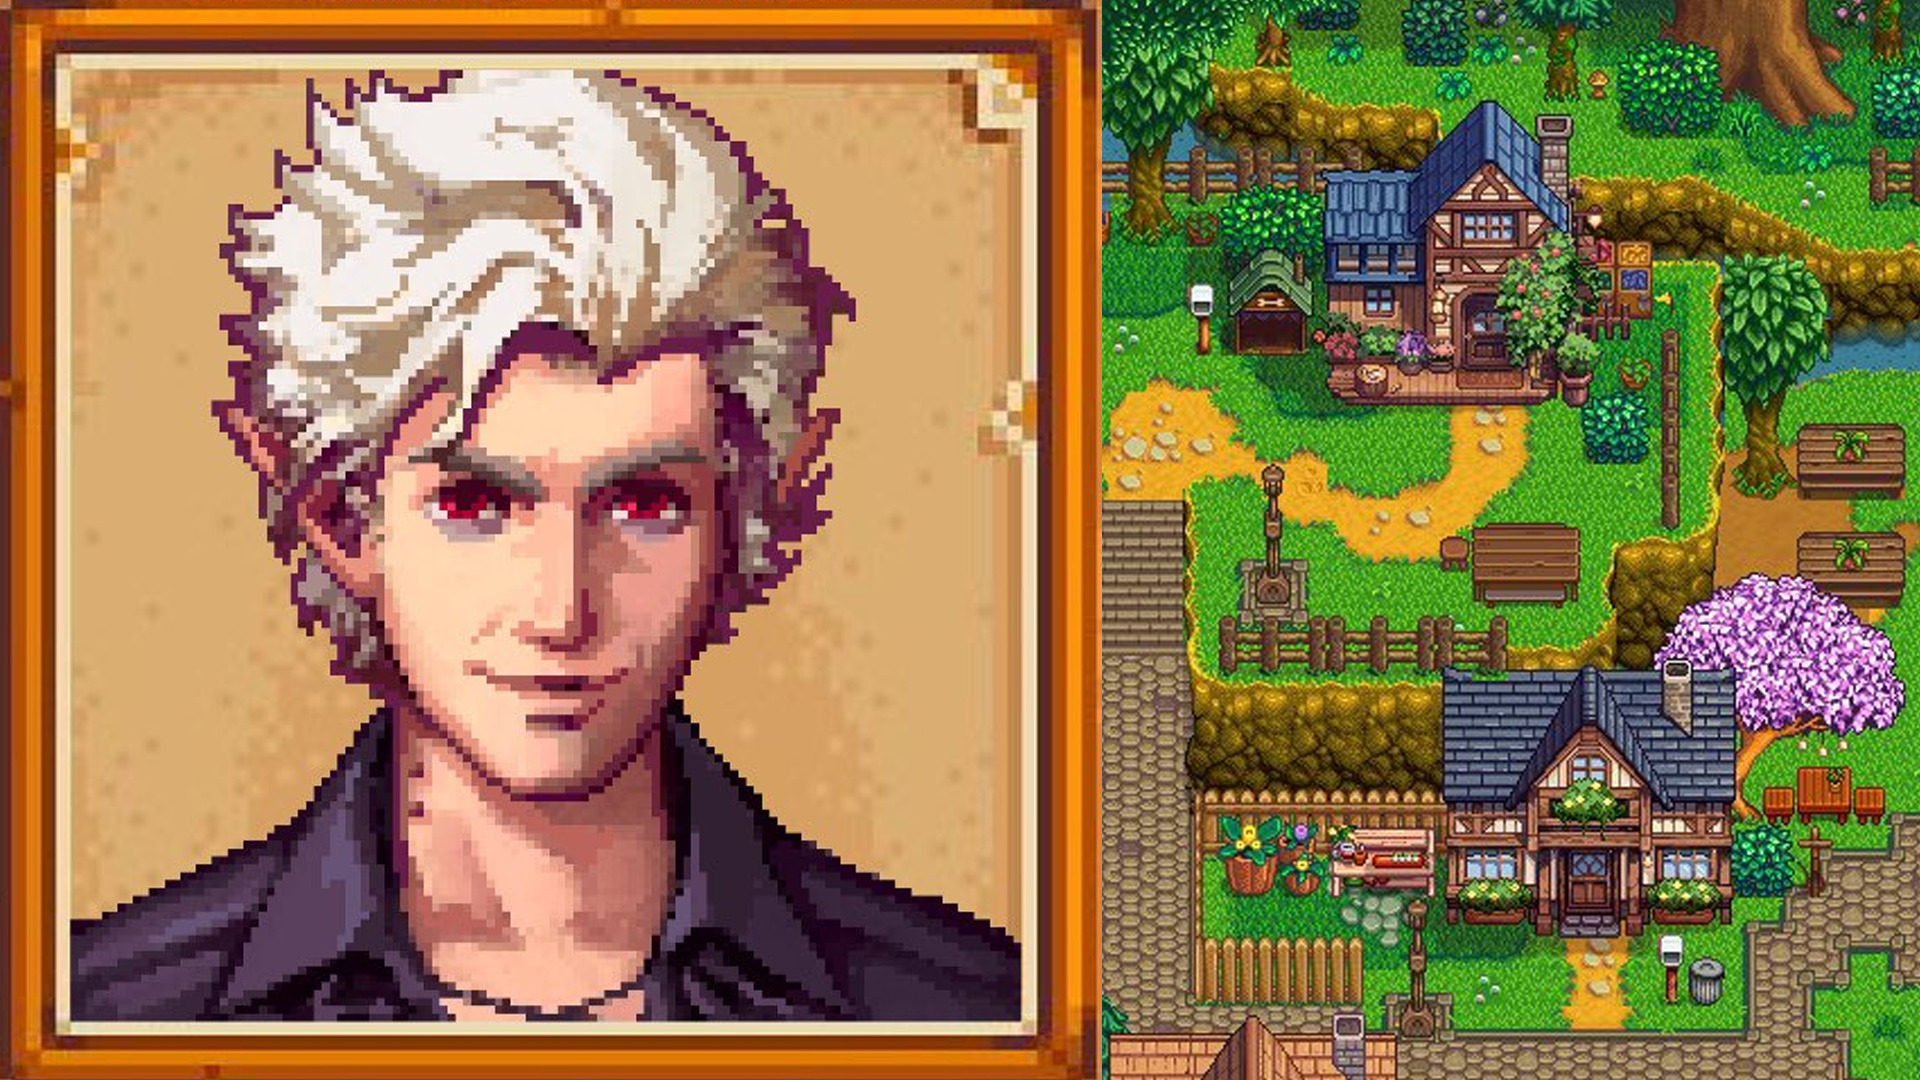 Baldur’s Gate 3 companions are being modded into Stardew Valley, so you can romance Astarion all over again